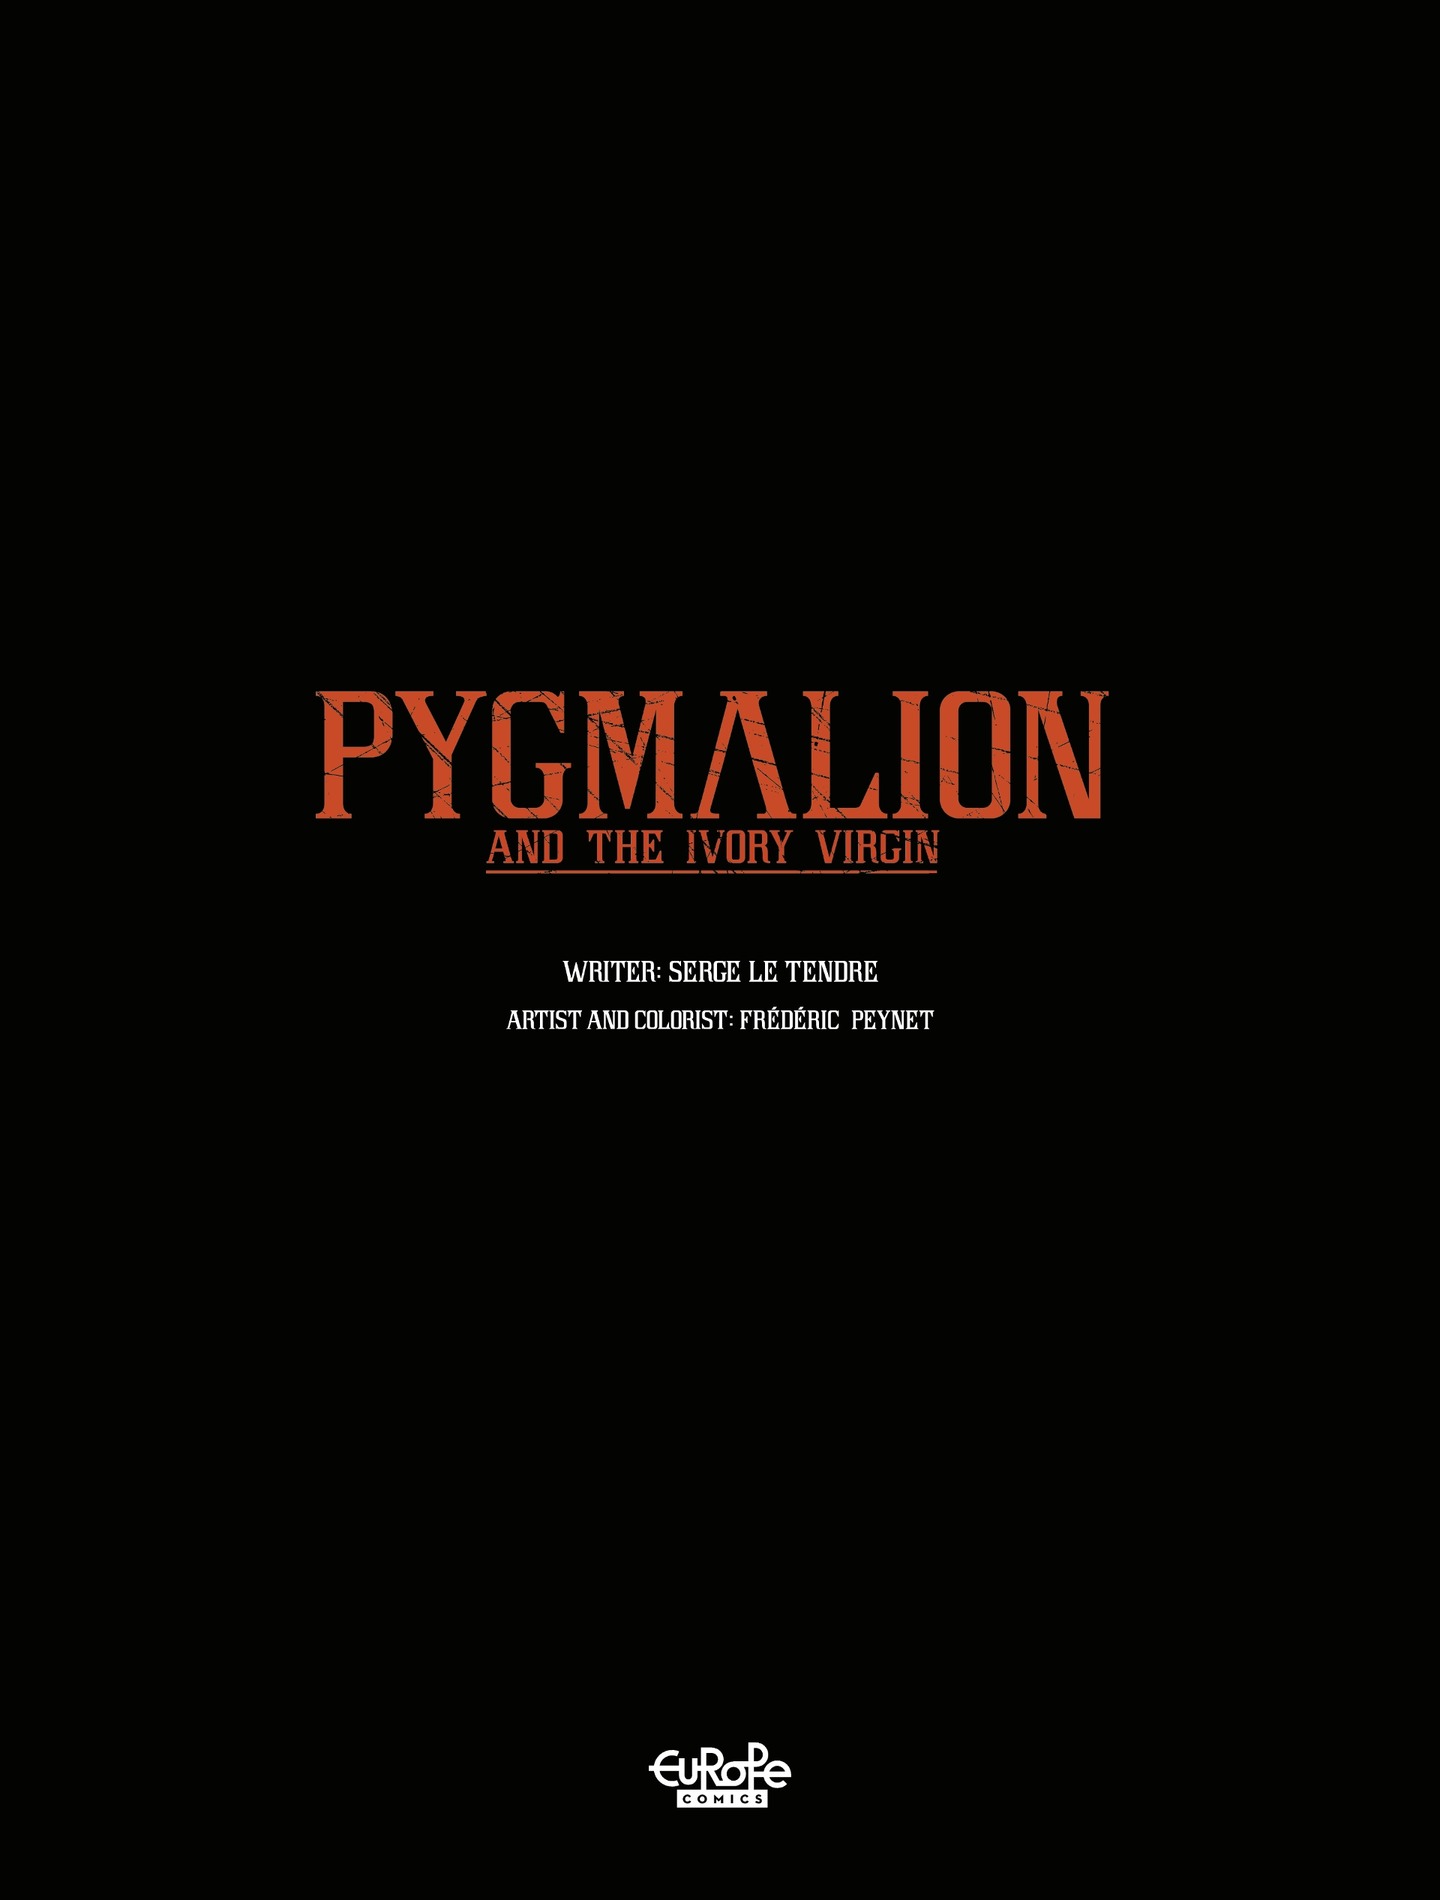 Read online Pygmalion and the Ivory Virgin comic -  Issue # TPB - 2